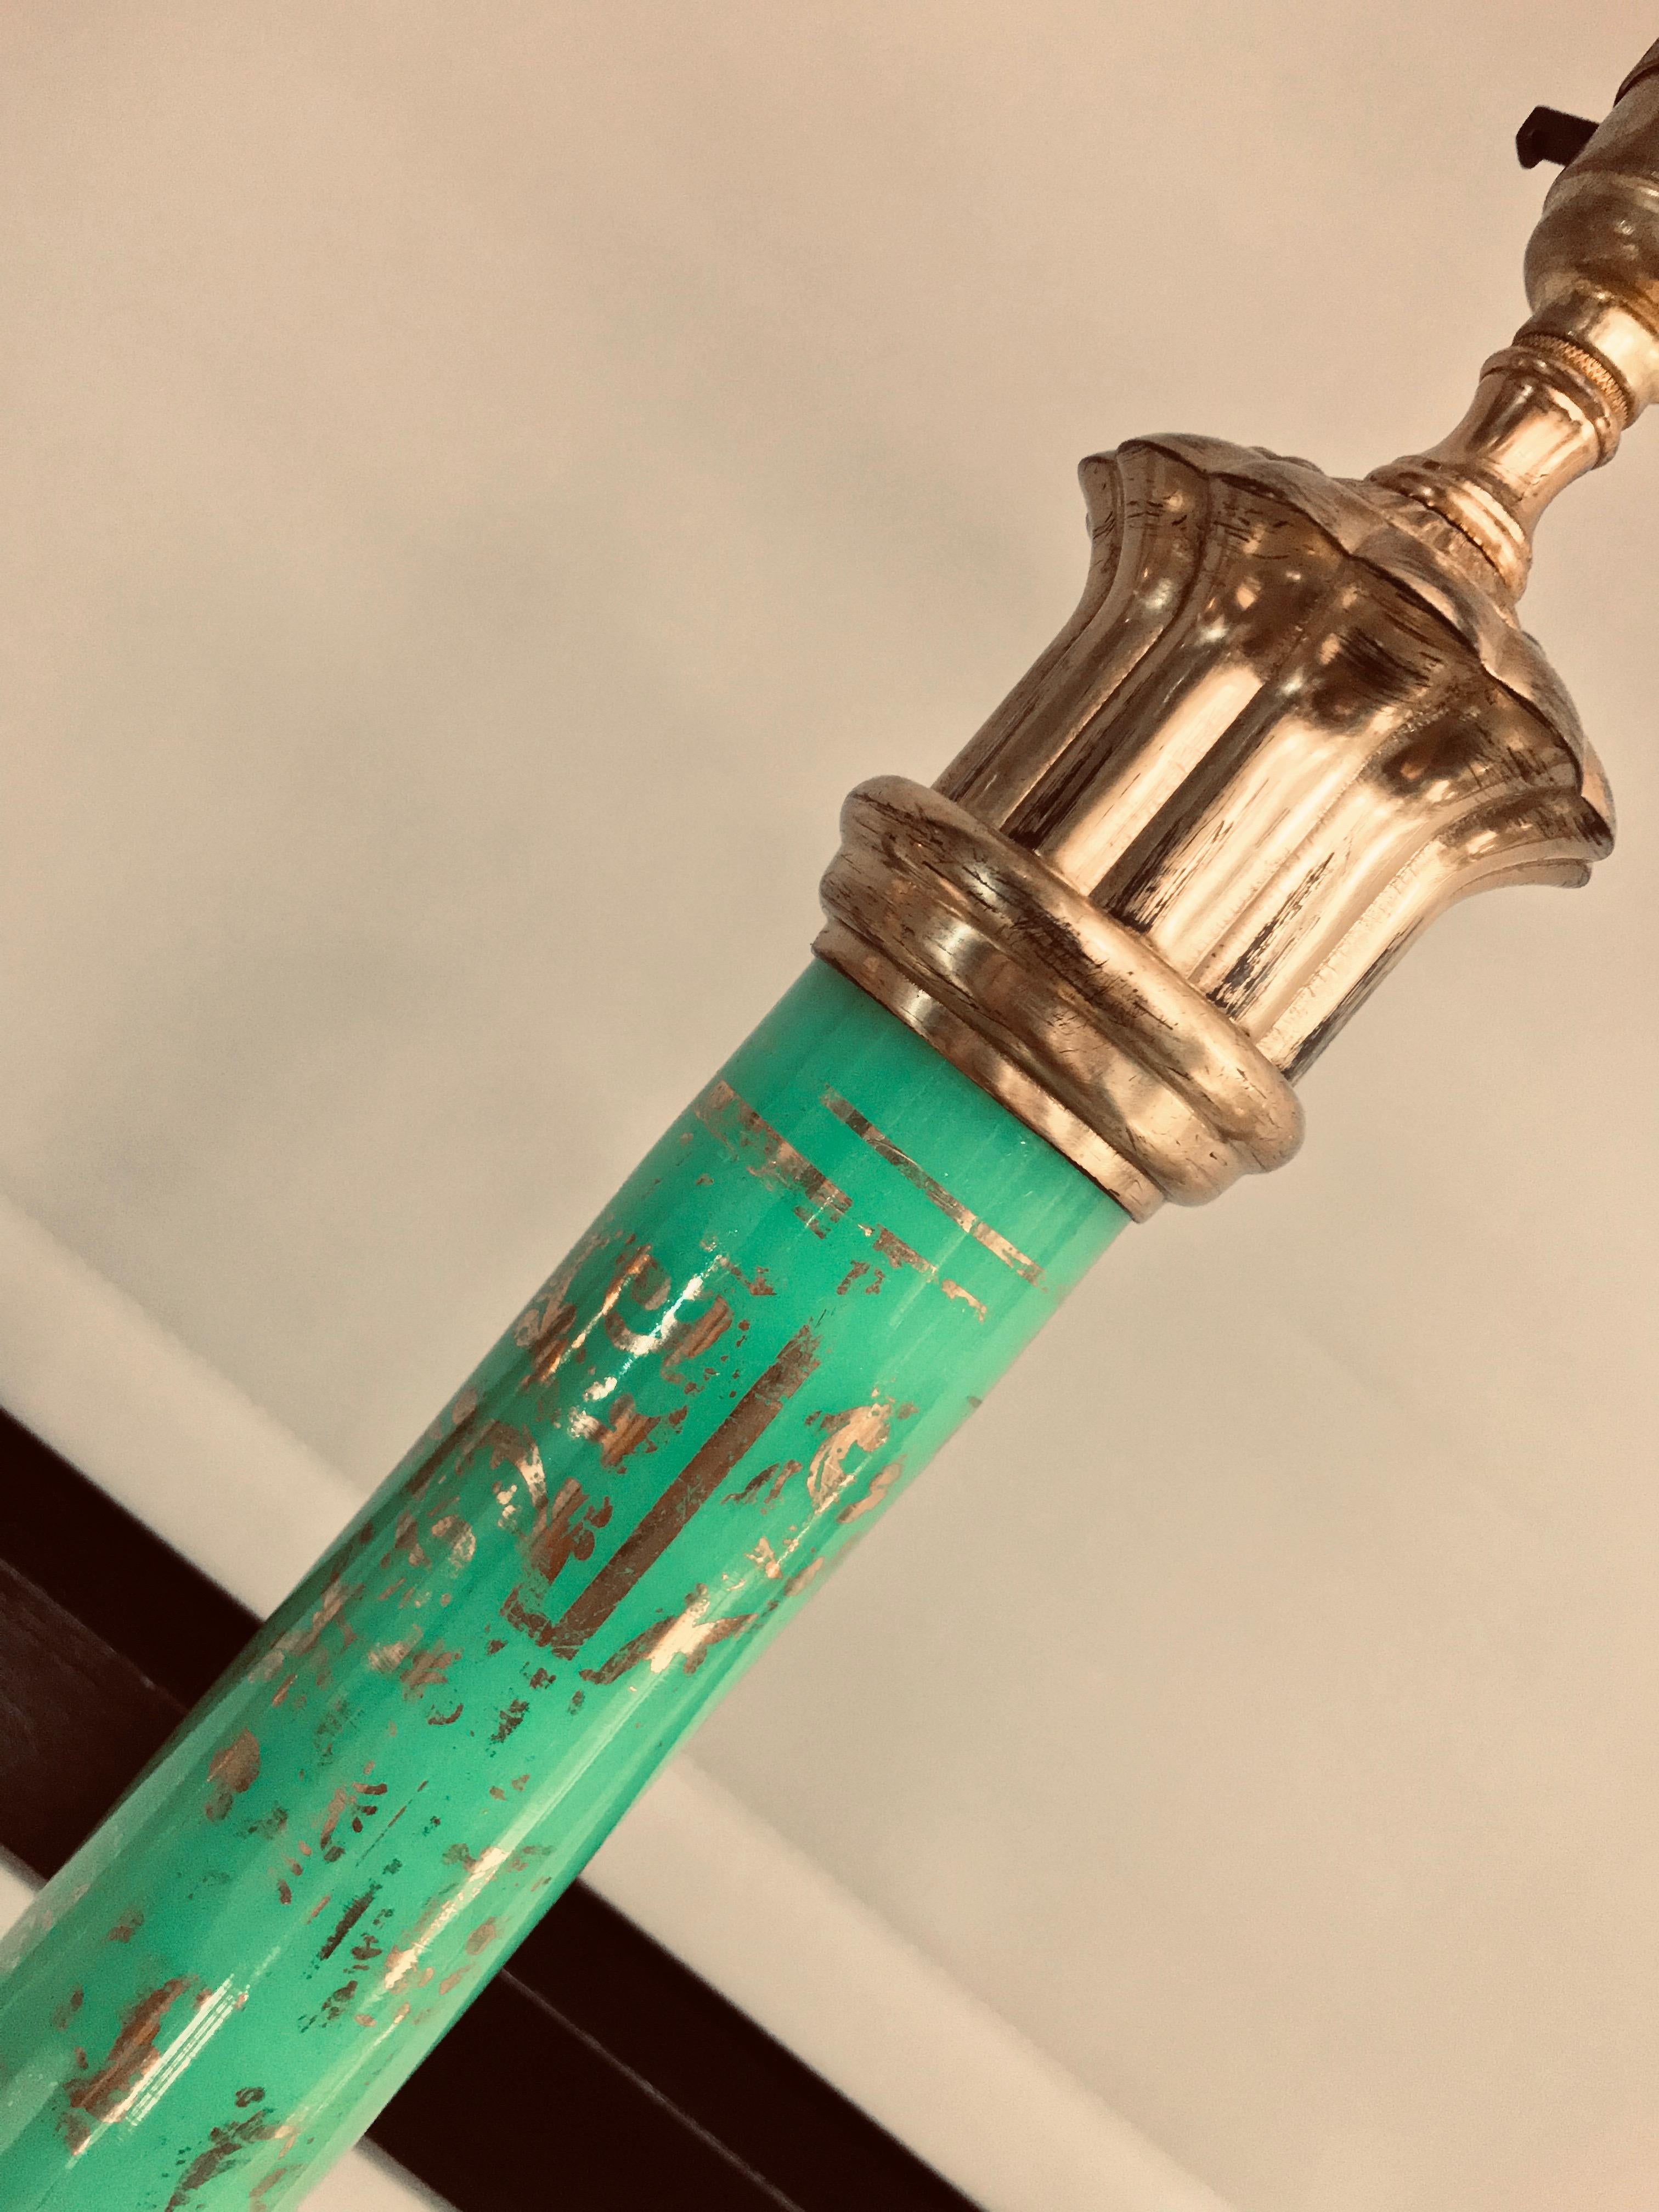 An Italian lamp in gilt metal with a green glass églomisé central shaft with traces of gold leaf.